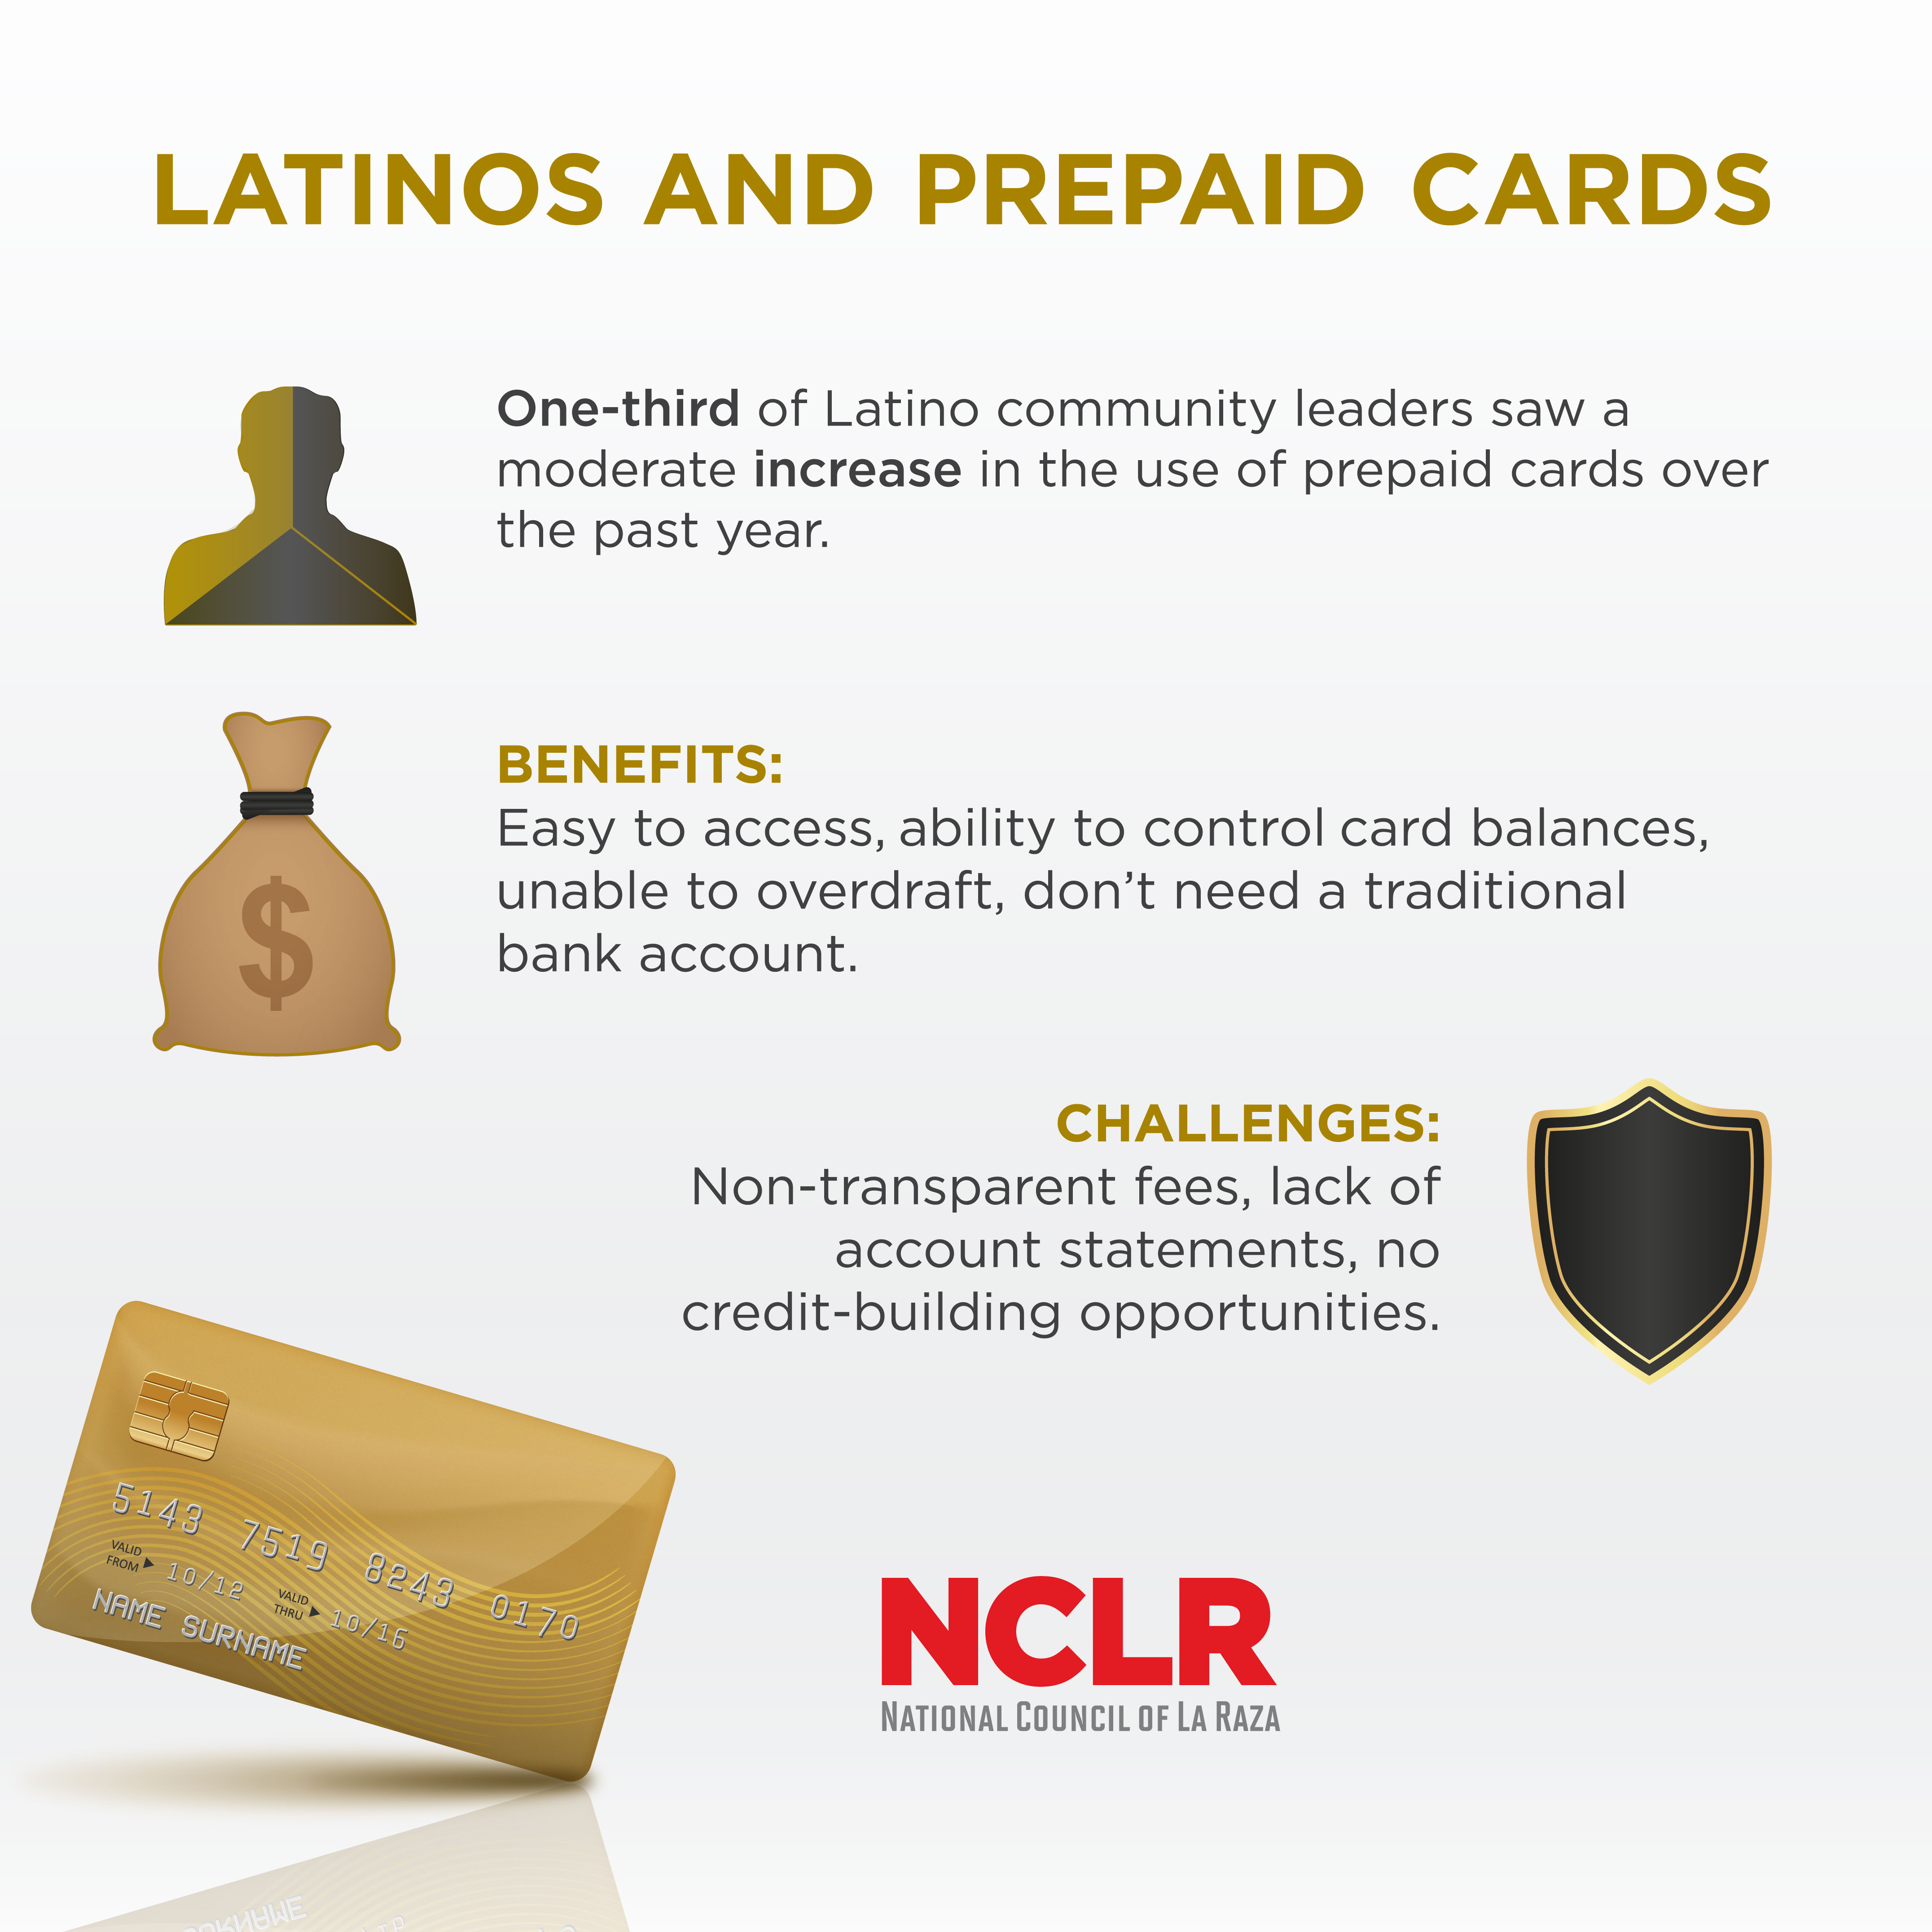 Prepaid cards sharegraphic